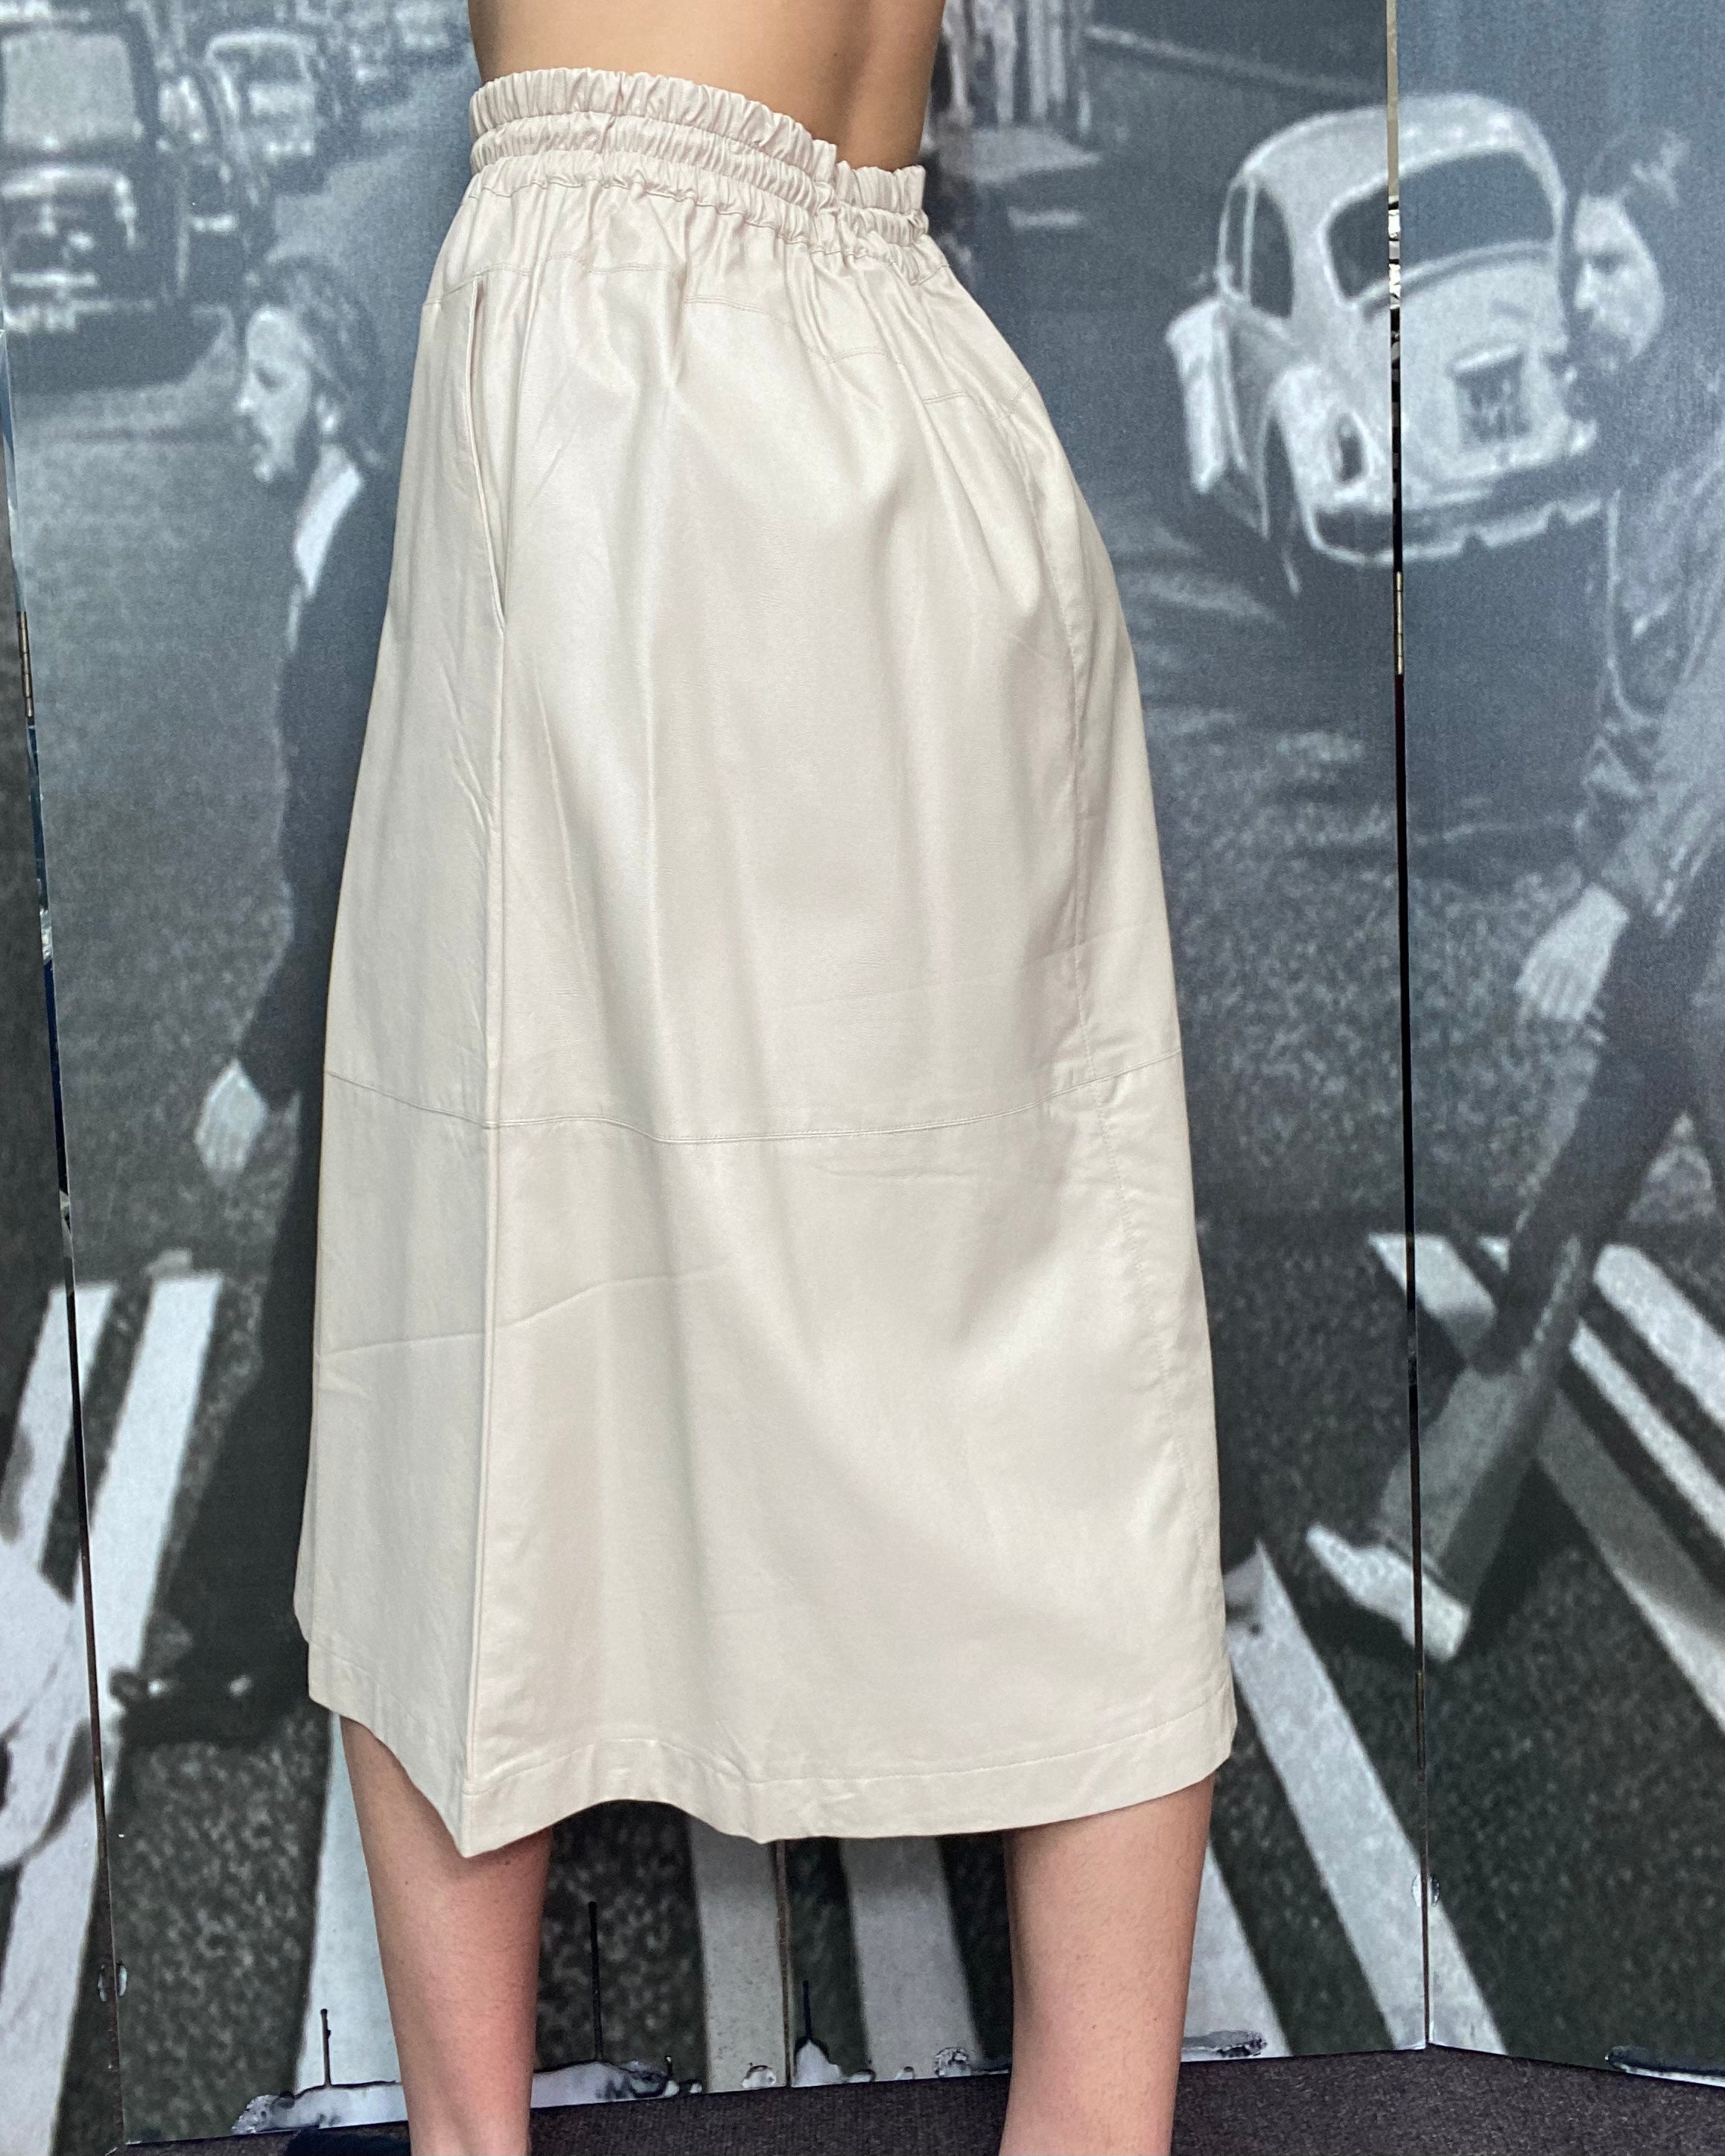 ESONI - BYoung Beige Pu Skirt -    SALE now